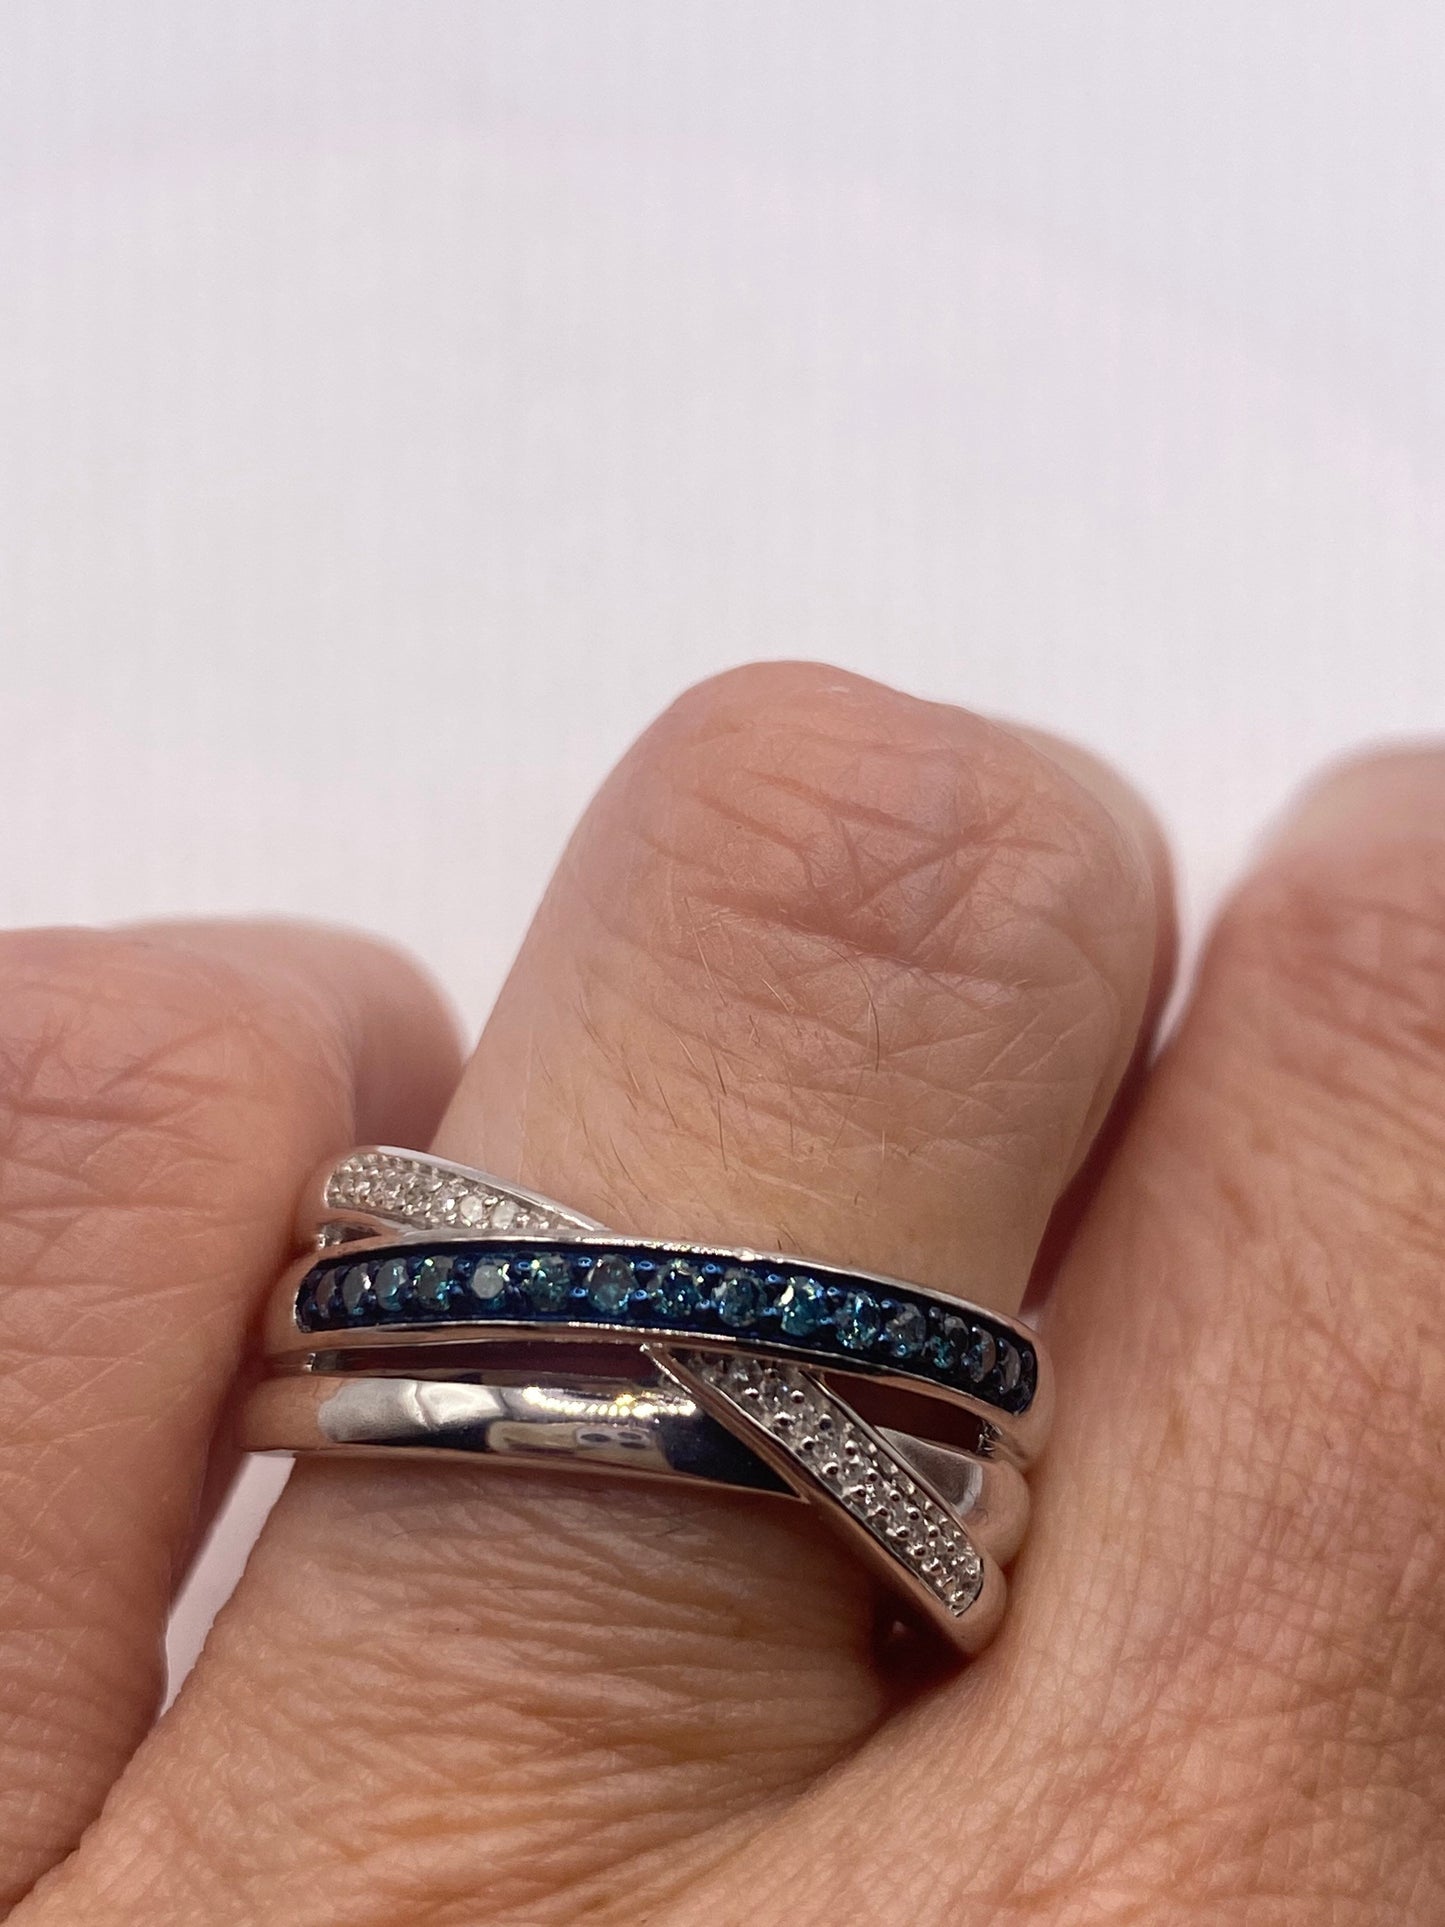 Vintage Blue and White Diamond 925 Sterling Silver Wedding Band Ring